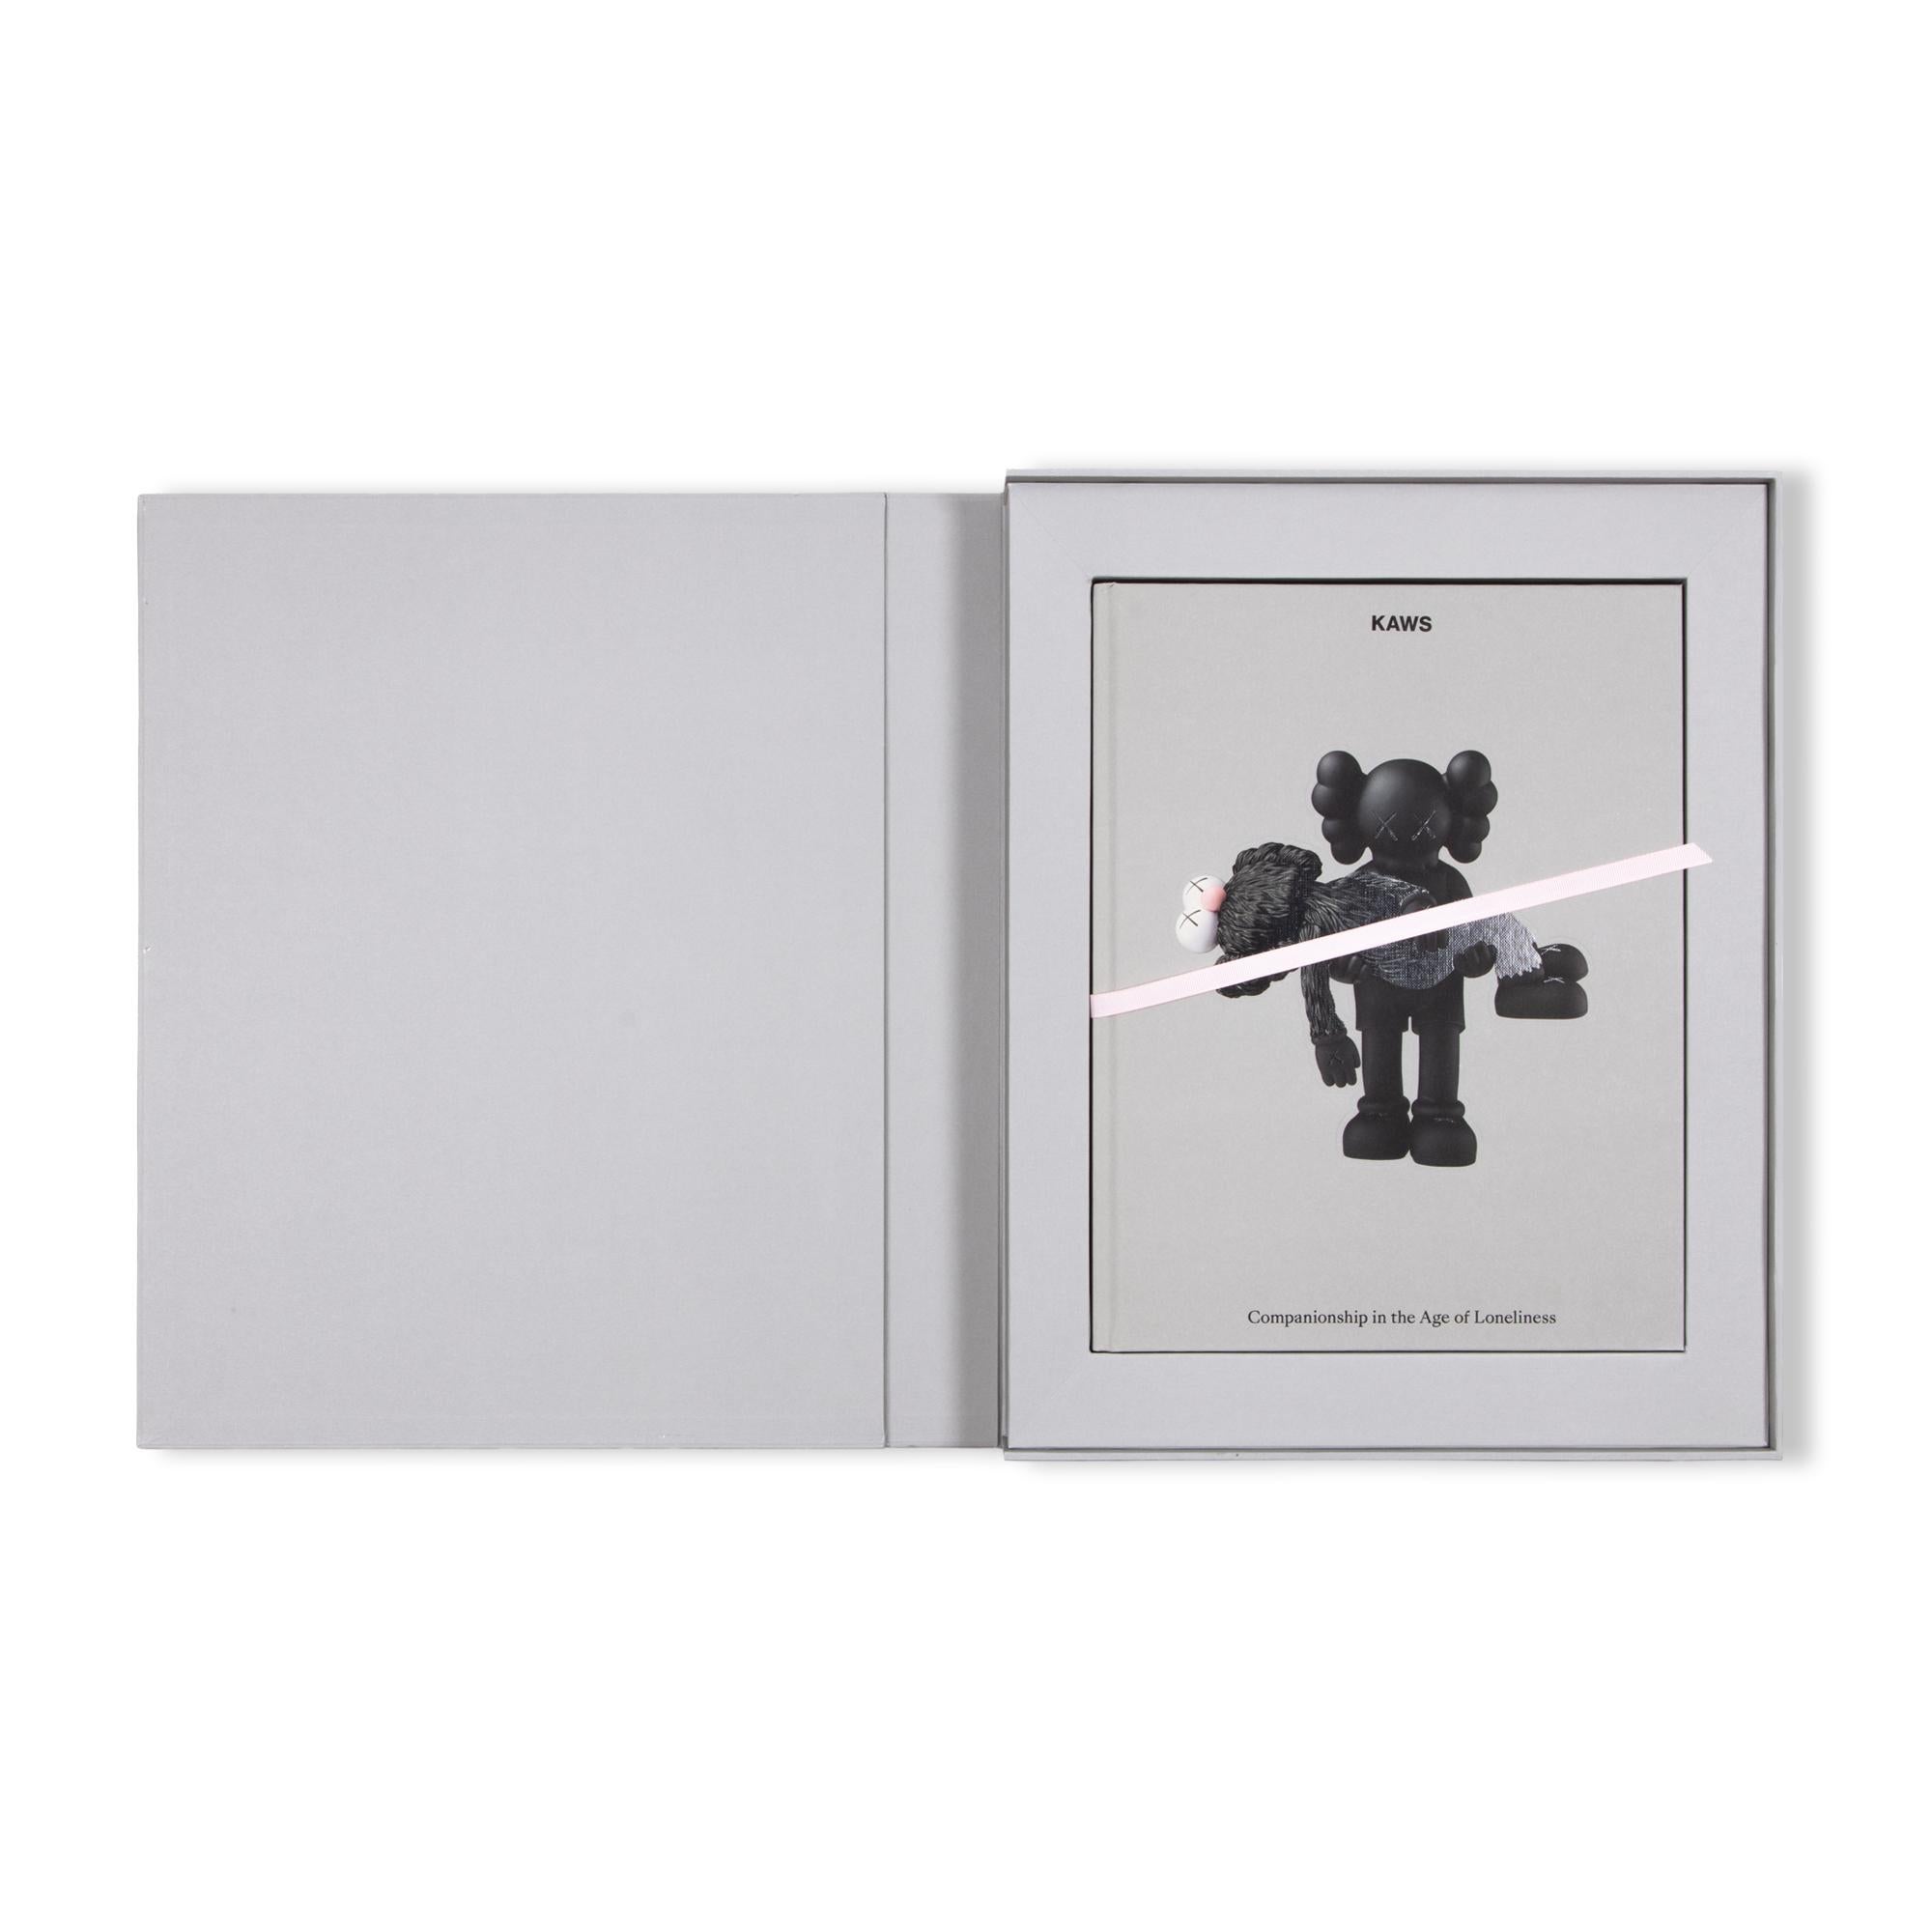 KAWS, Gone - Screenprint incl. Limited Edition Catalogue, Signed Print 2